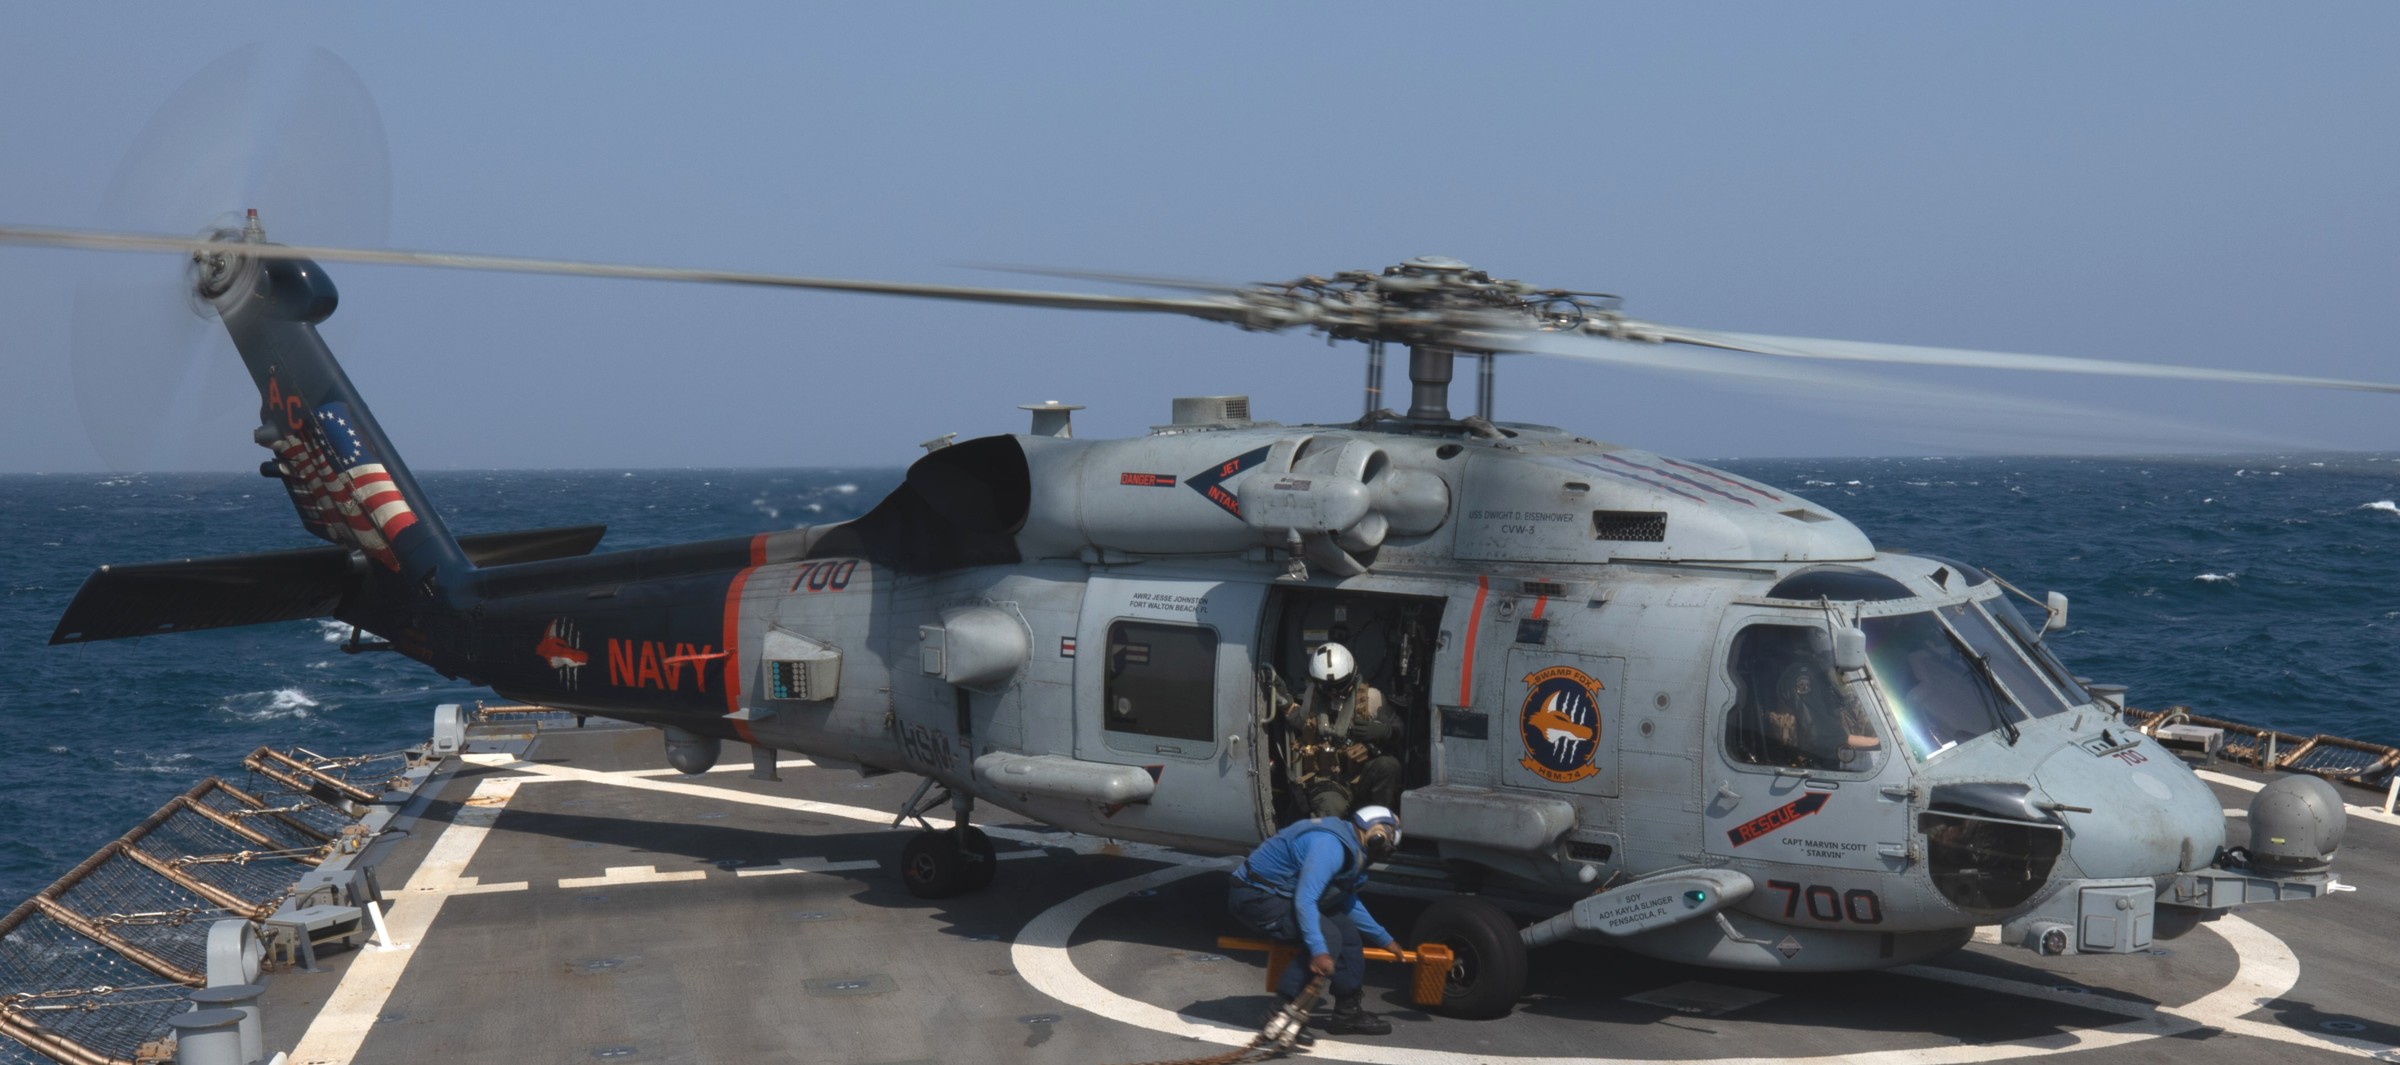 hsm-74 swamp foxes helicopter maritime strike squadron mh-60r seahawk ddg-58 uss laboon 128